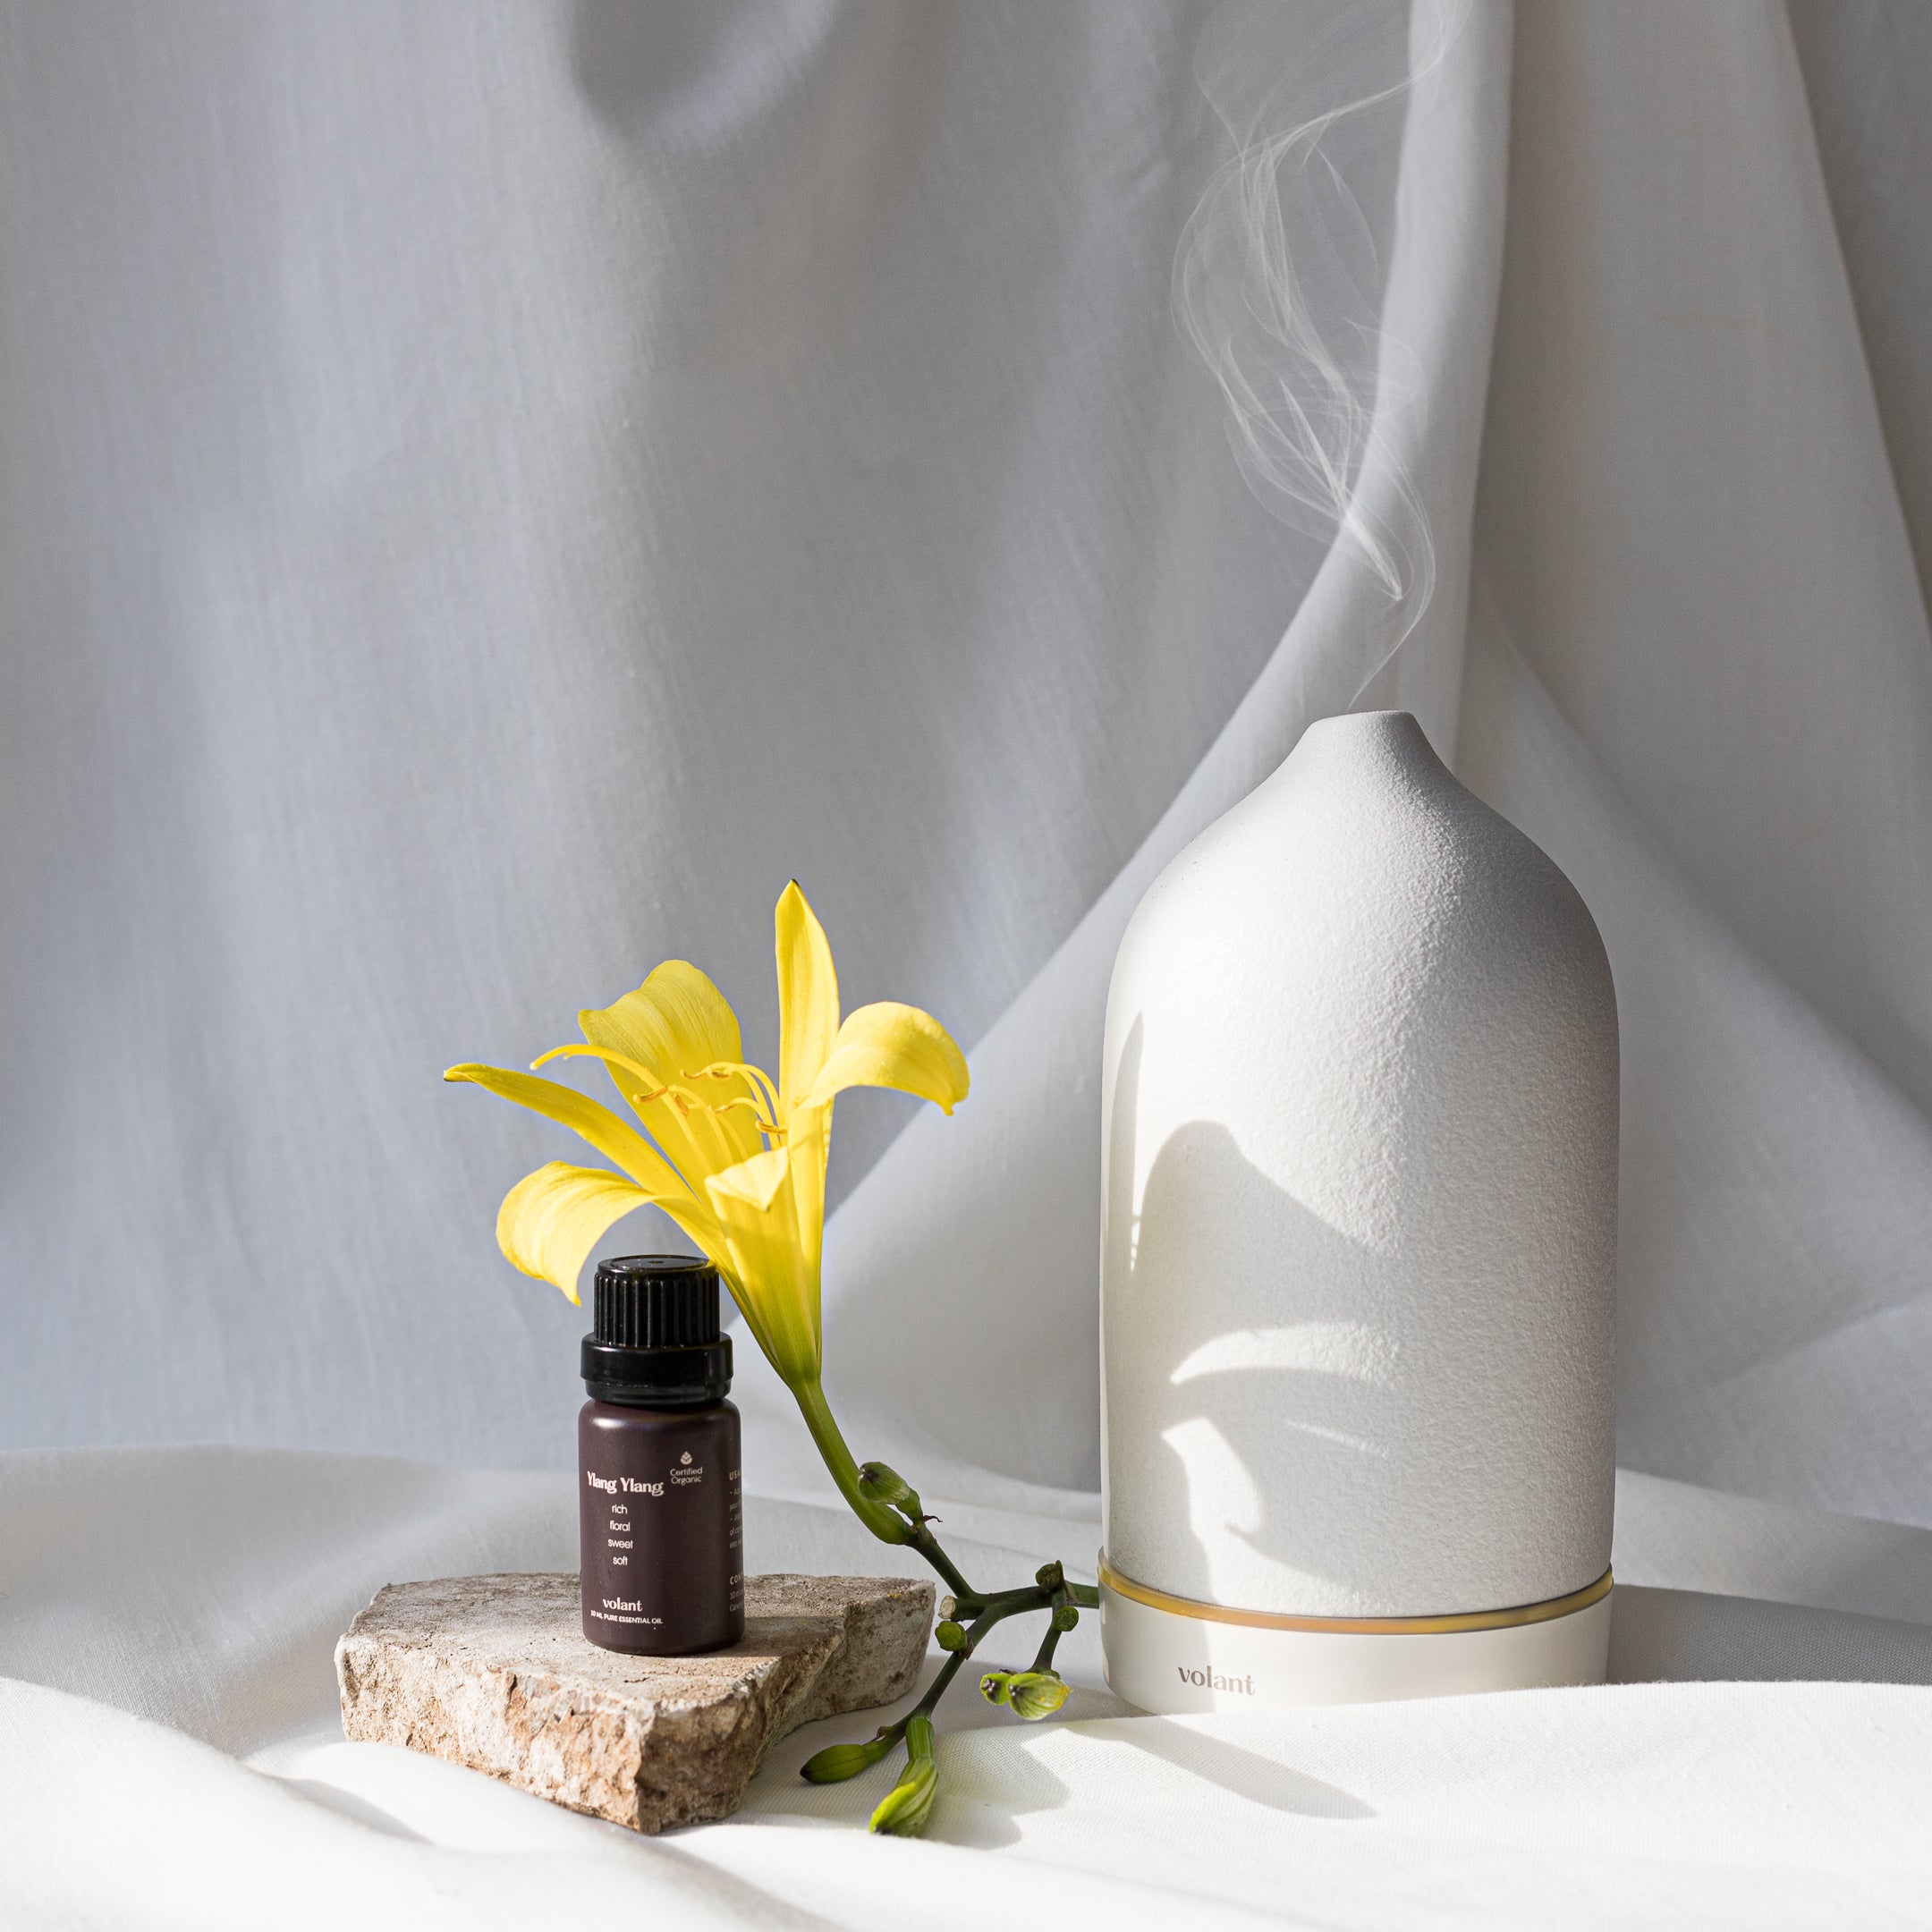 volant white diffuser using organic ylang ylang essential oil for stress and relaxation